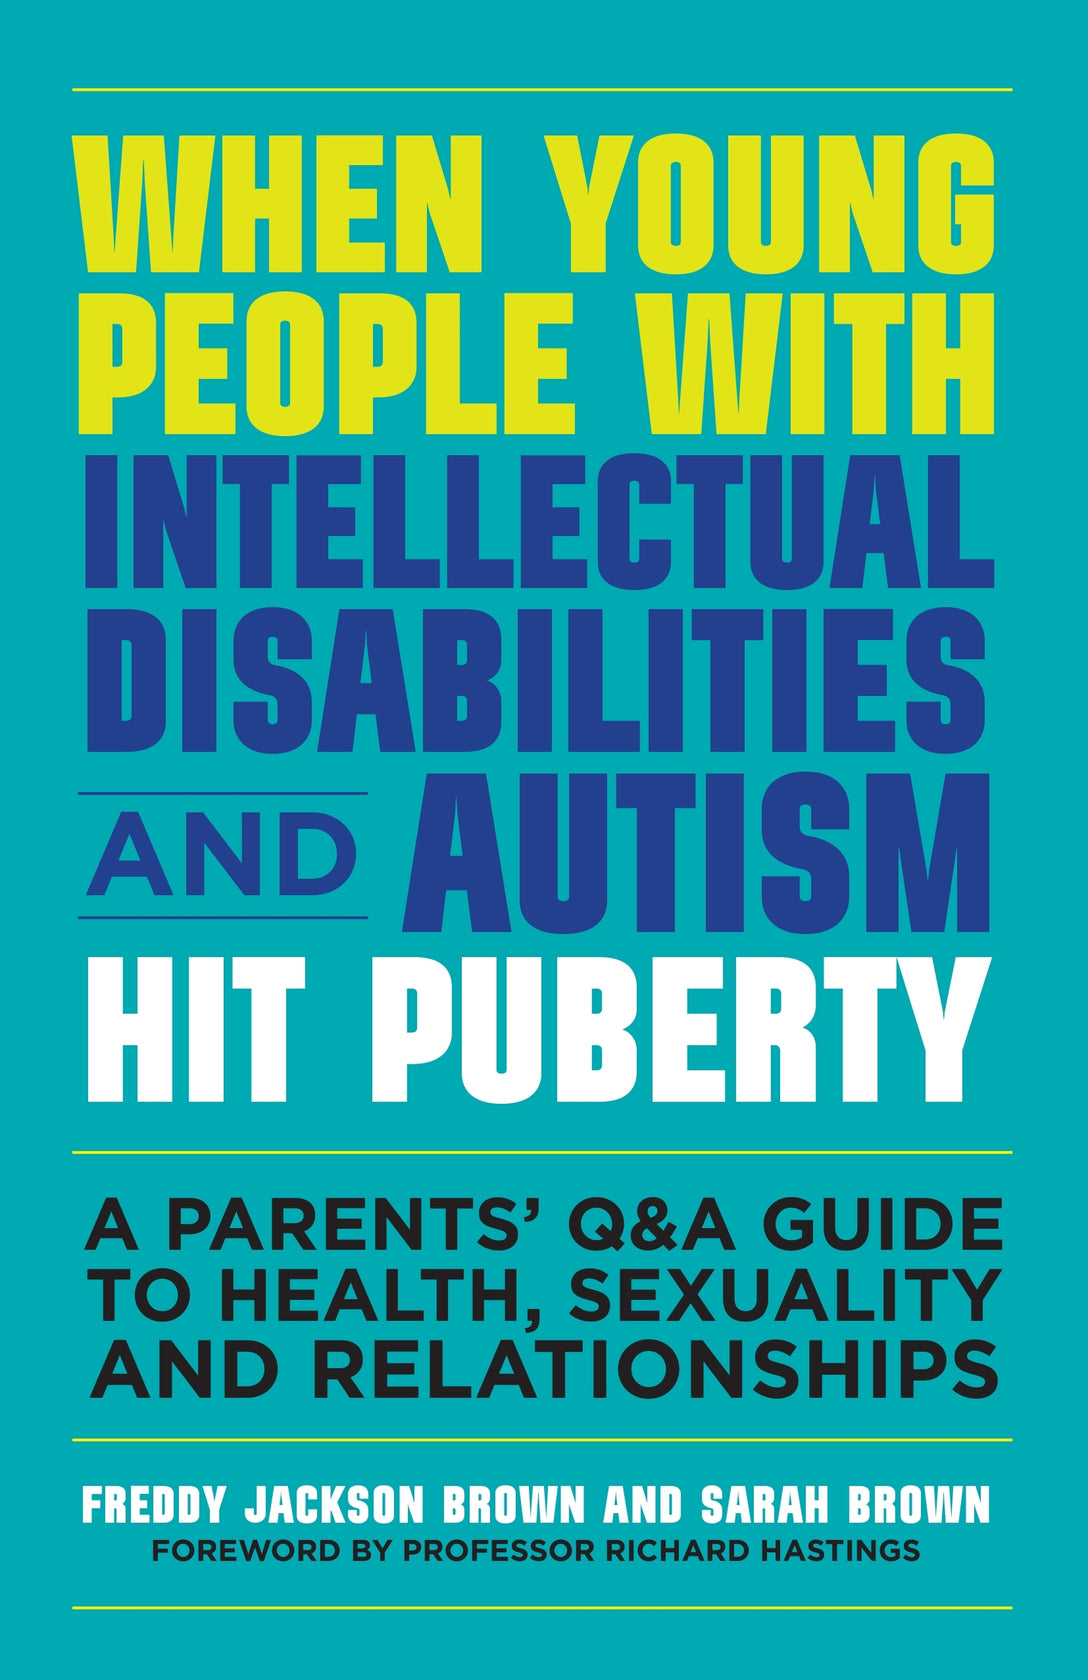 When Young People with Intellectual Disabilities and Autism Hit Puberty by Freddy Jackson Brown, Sarah Brown, Richard Hastings